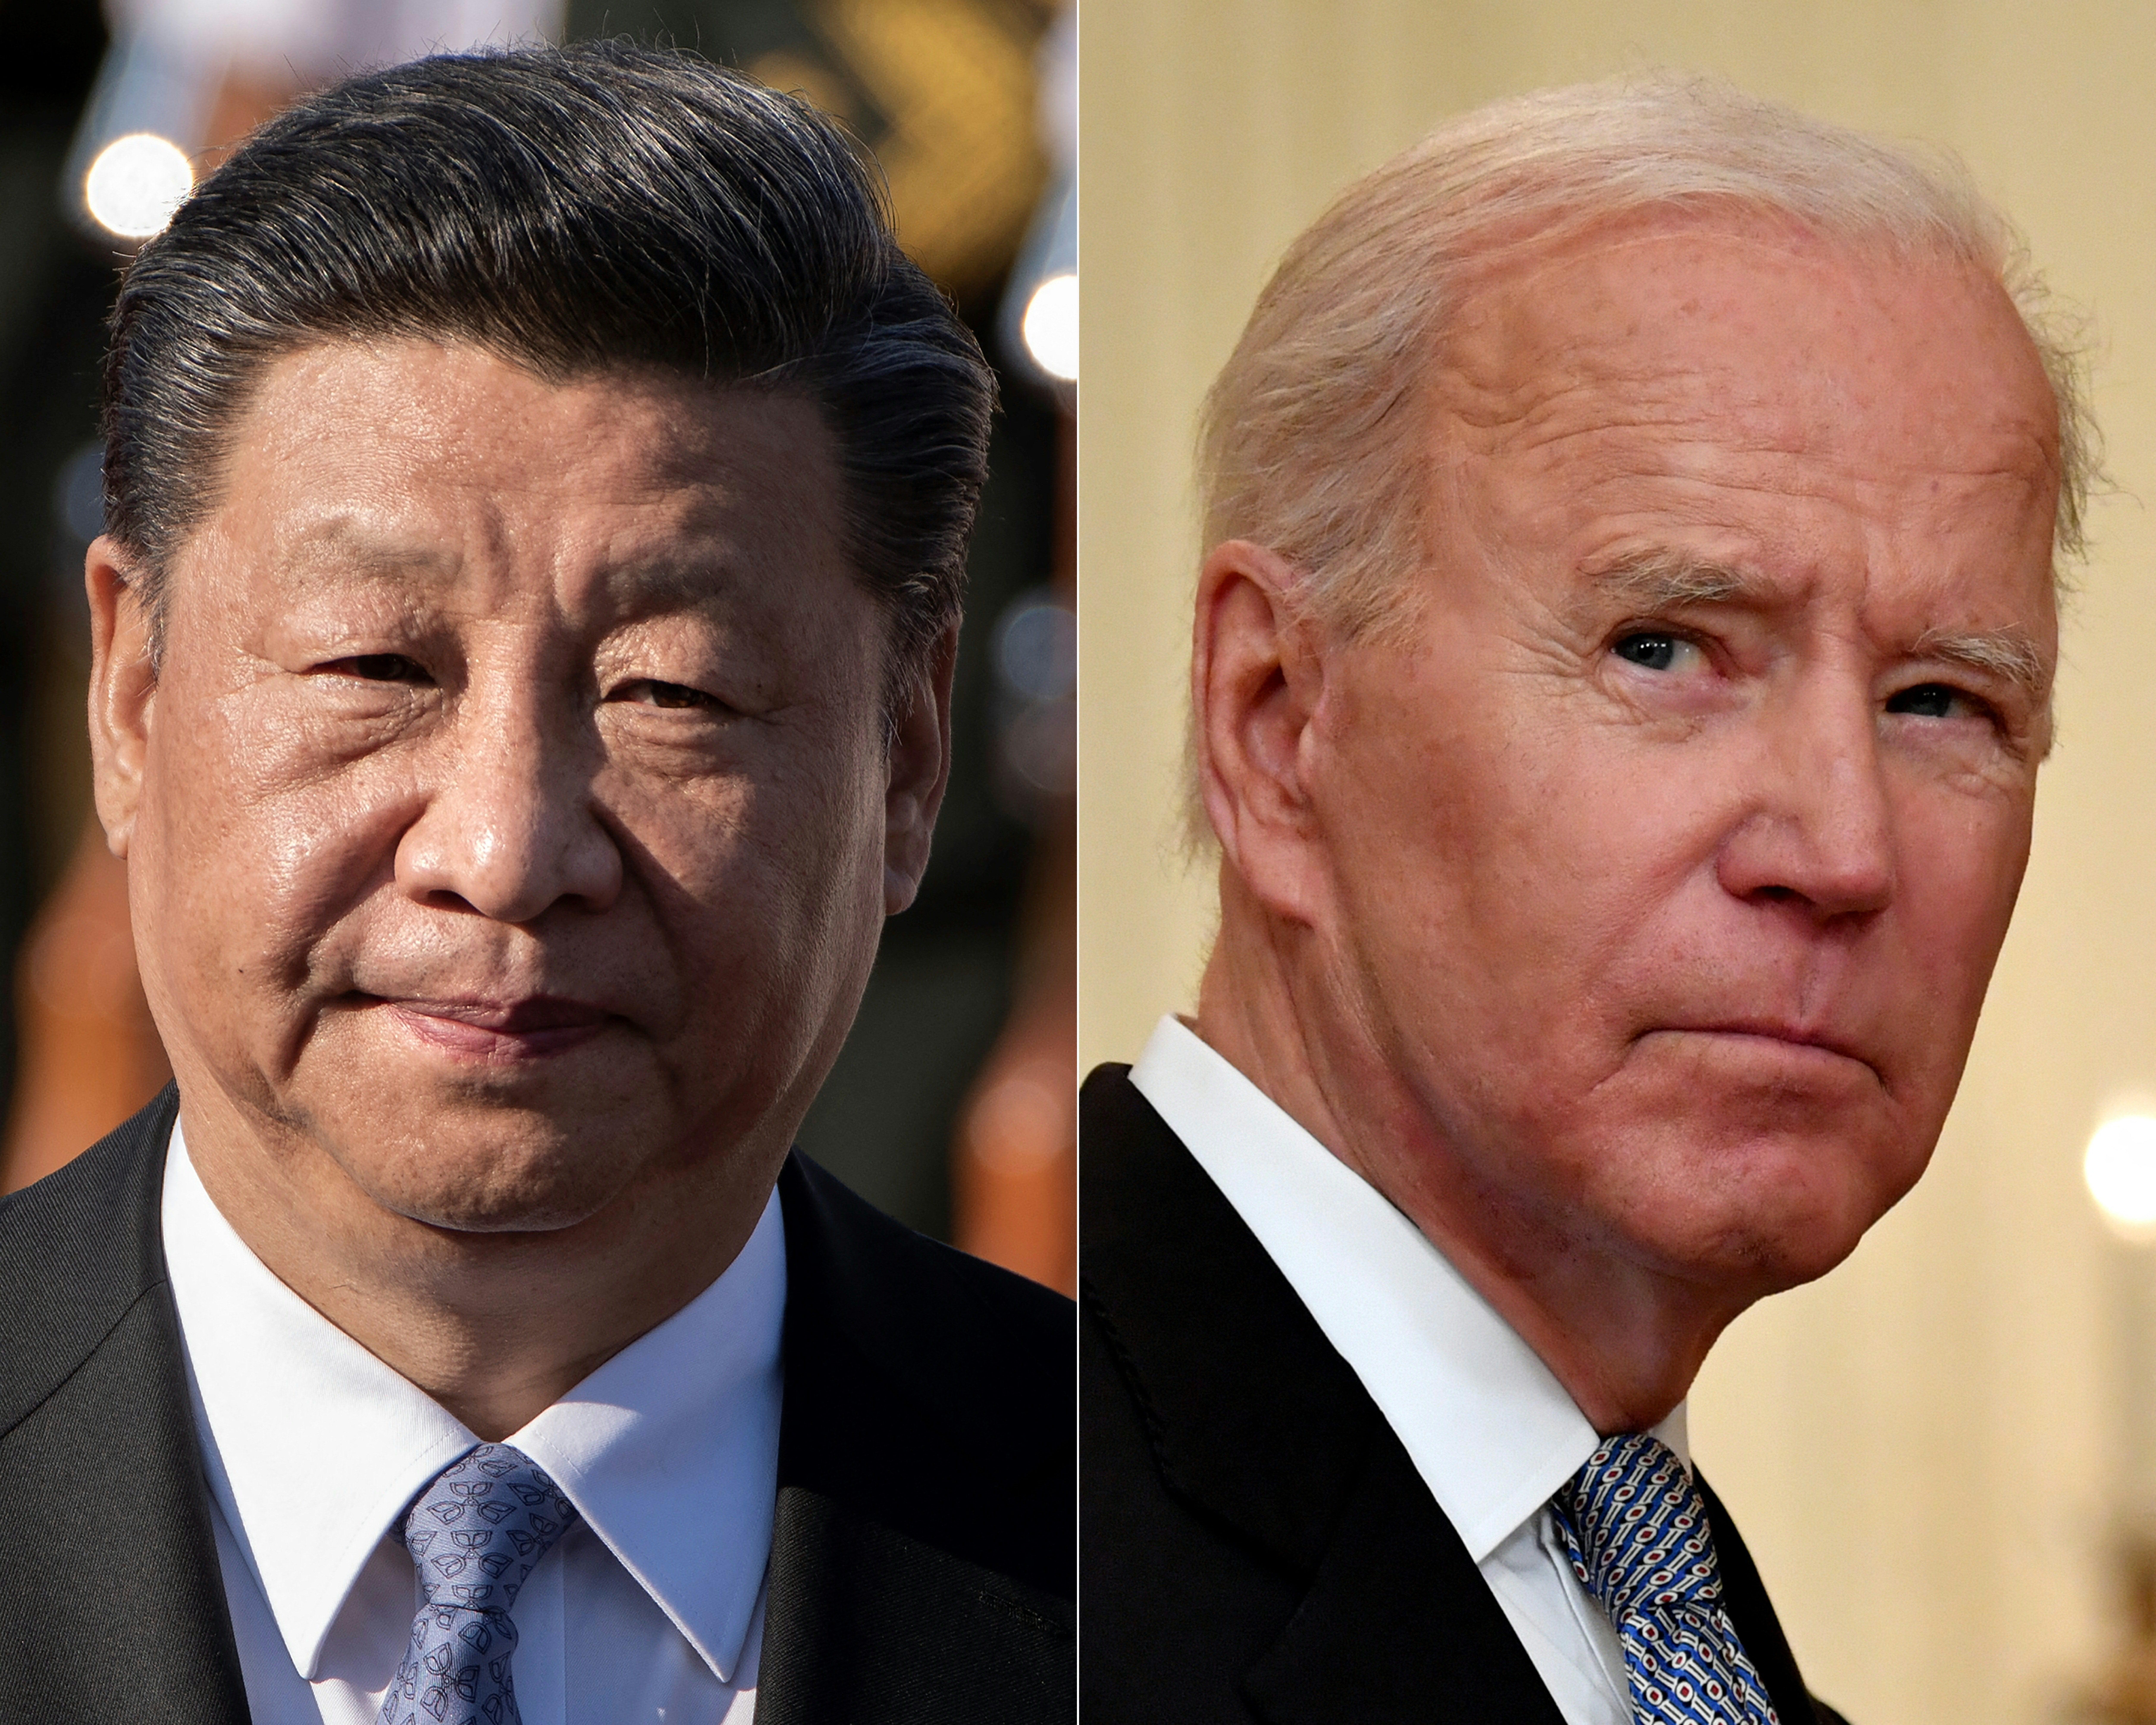 This combination of file pictures created on June 08, 2021 shows Chinese President Xi Jinping (L) during a welcome ceremony for Bulgaria's President Rumen Radev in Beijing on July 3, 2019; and US President Joe Biden speaking at the White House in Washington, DC, on May 17, 2021. - US President Joe Biden will hold a hotly anticipated virtual summit with his Chinese counterpart Xi Jinping on Monday, the White House announced, as tensions mount over Taiwan, human rights and trade. Relations between the world's two largest economies have recently deteriorated, in particular over Taiwan, a self-ruling democracy claimed by China, which last month made a record number of air incursions near the island. (Photo by NICOLAS ASFOURI and Nicholas Kamm / AFP)